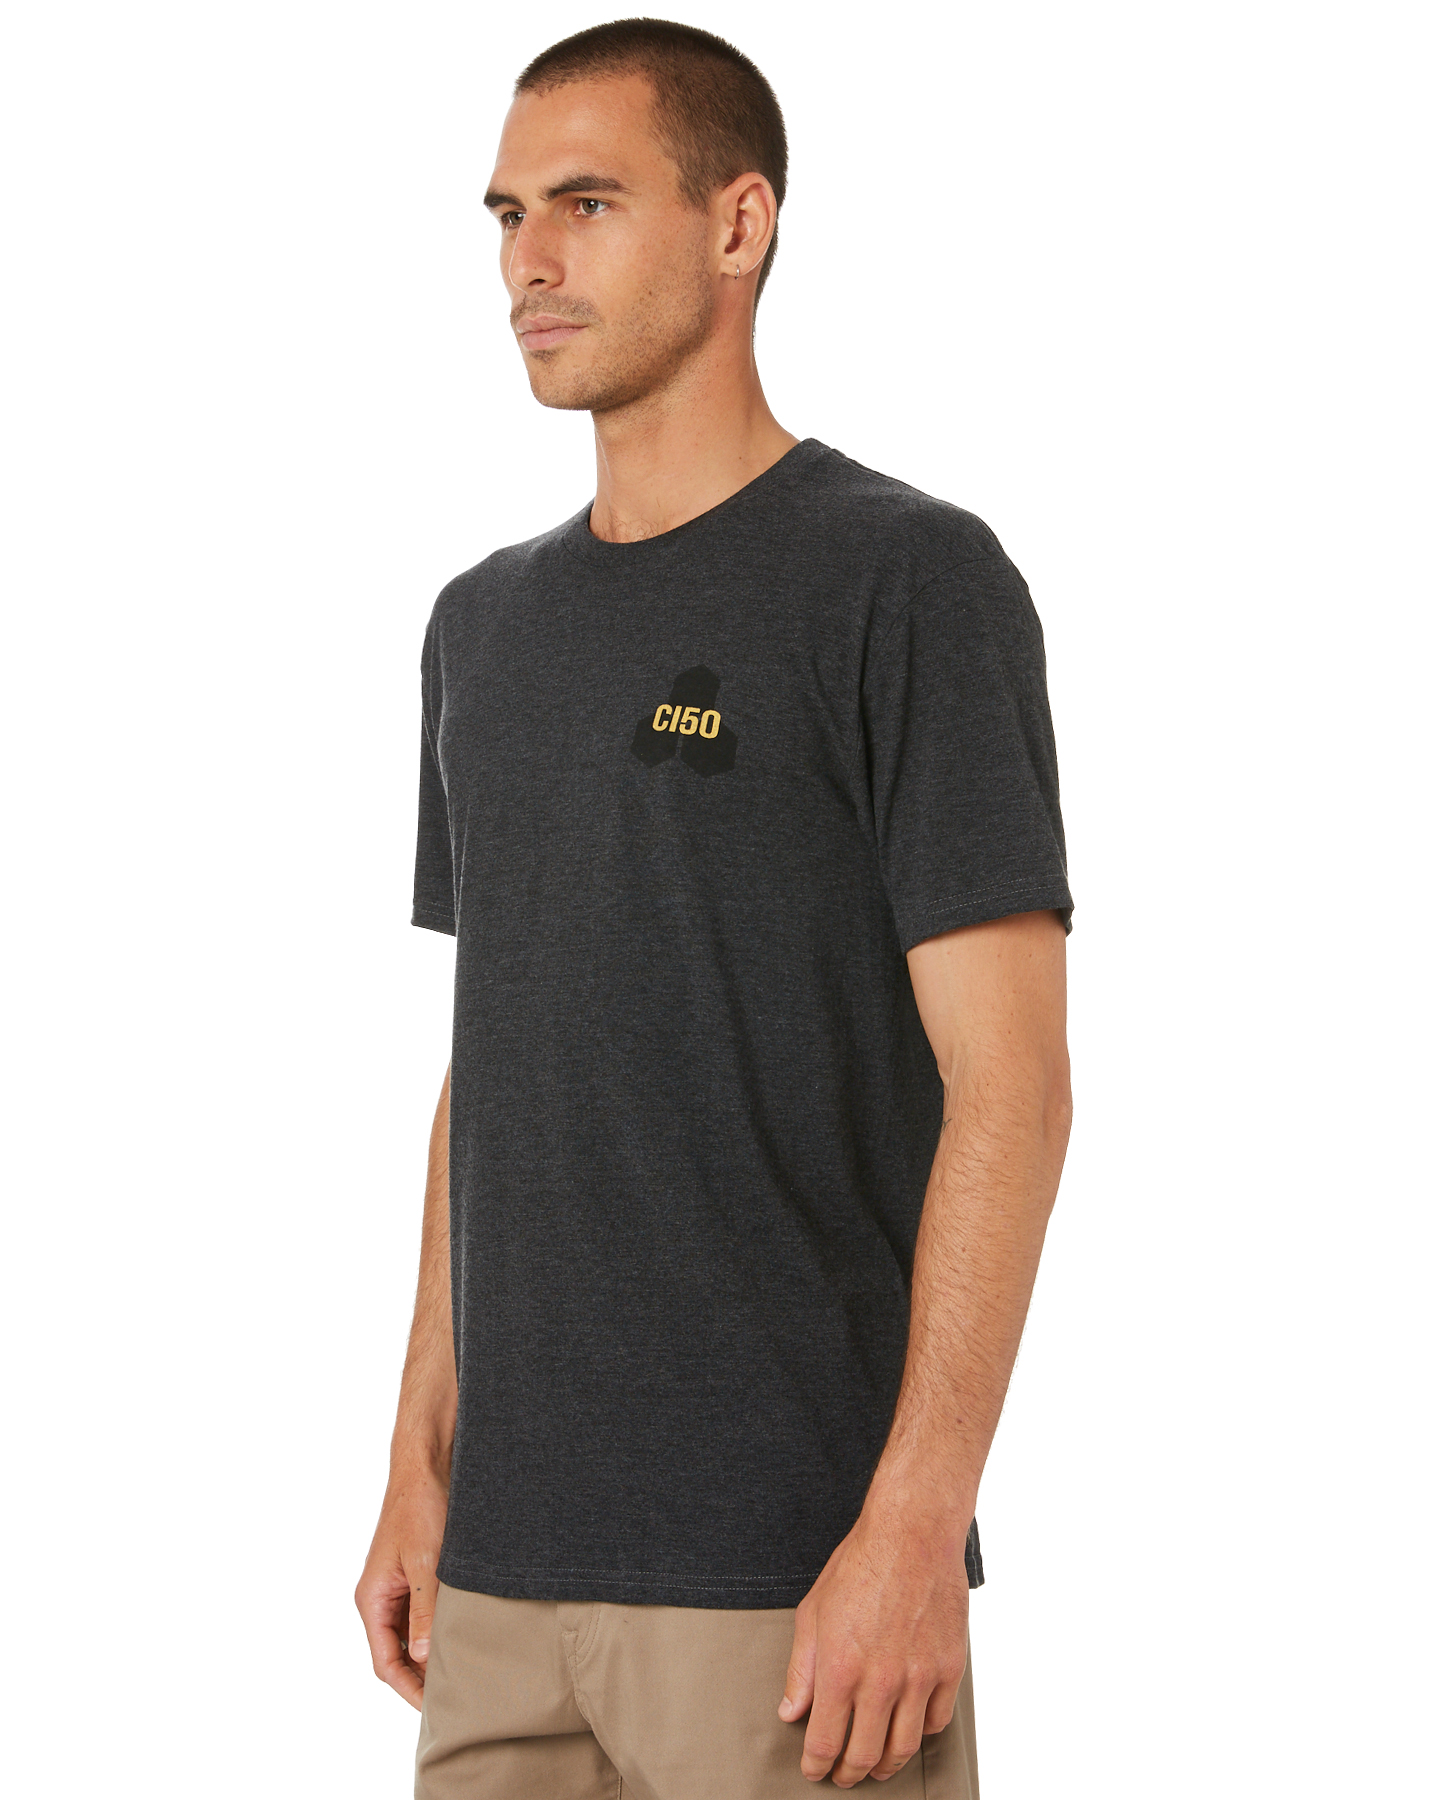 Channel Islands 50Th Anniversary Mens Tee - Charcoal Heather | SurfStitch